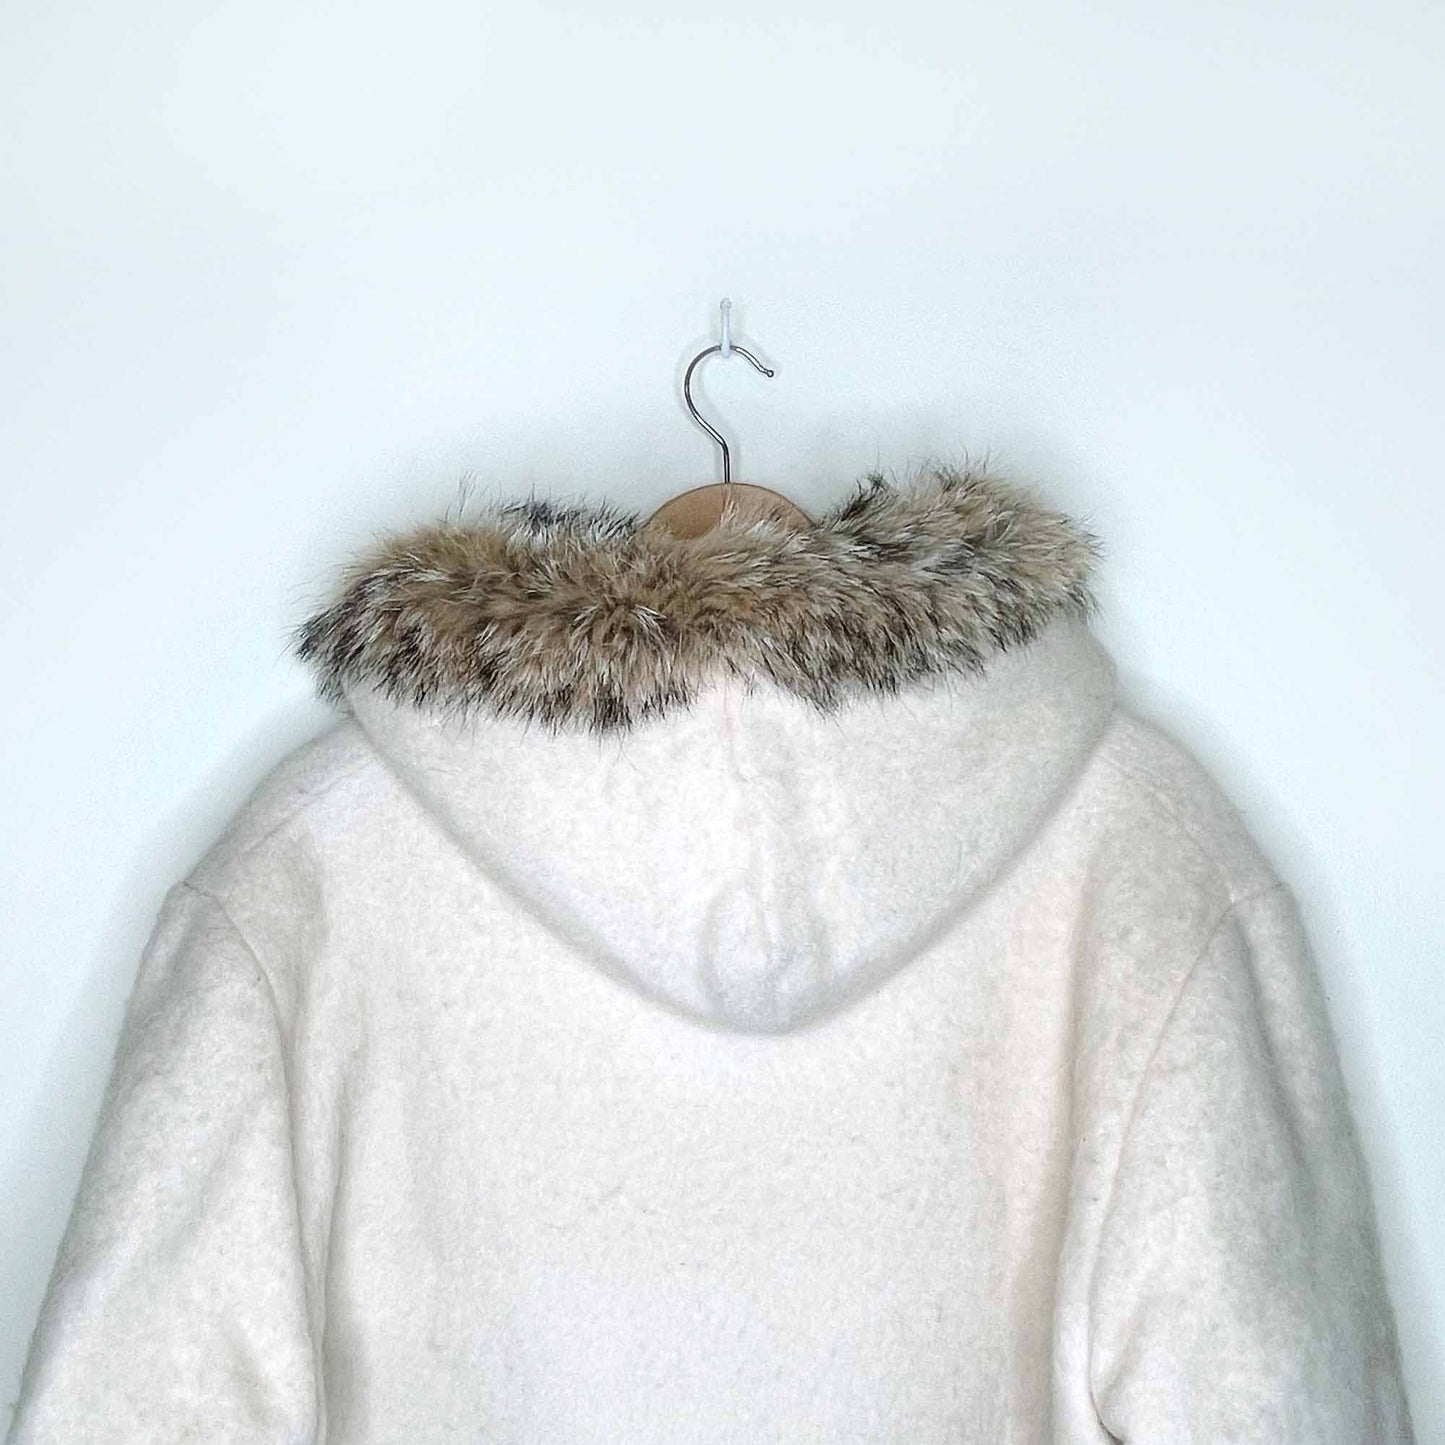 vintage hudson's bay company natural wool leather igloo scene parka with fox fur hood - size 16